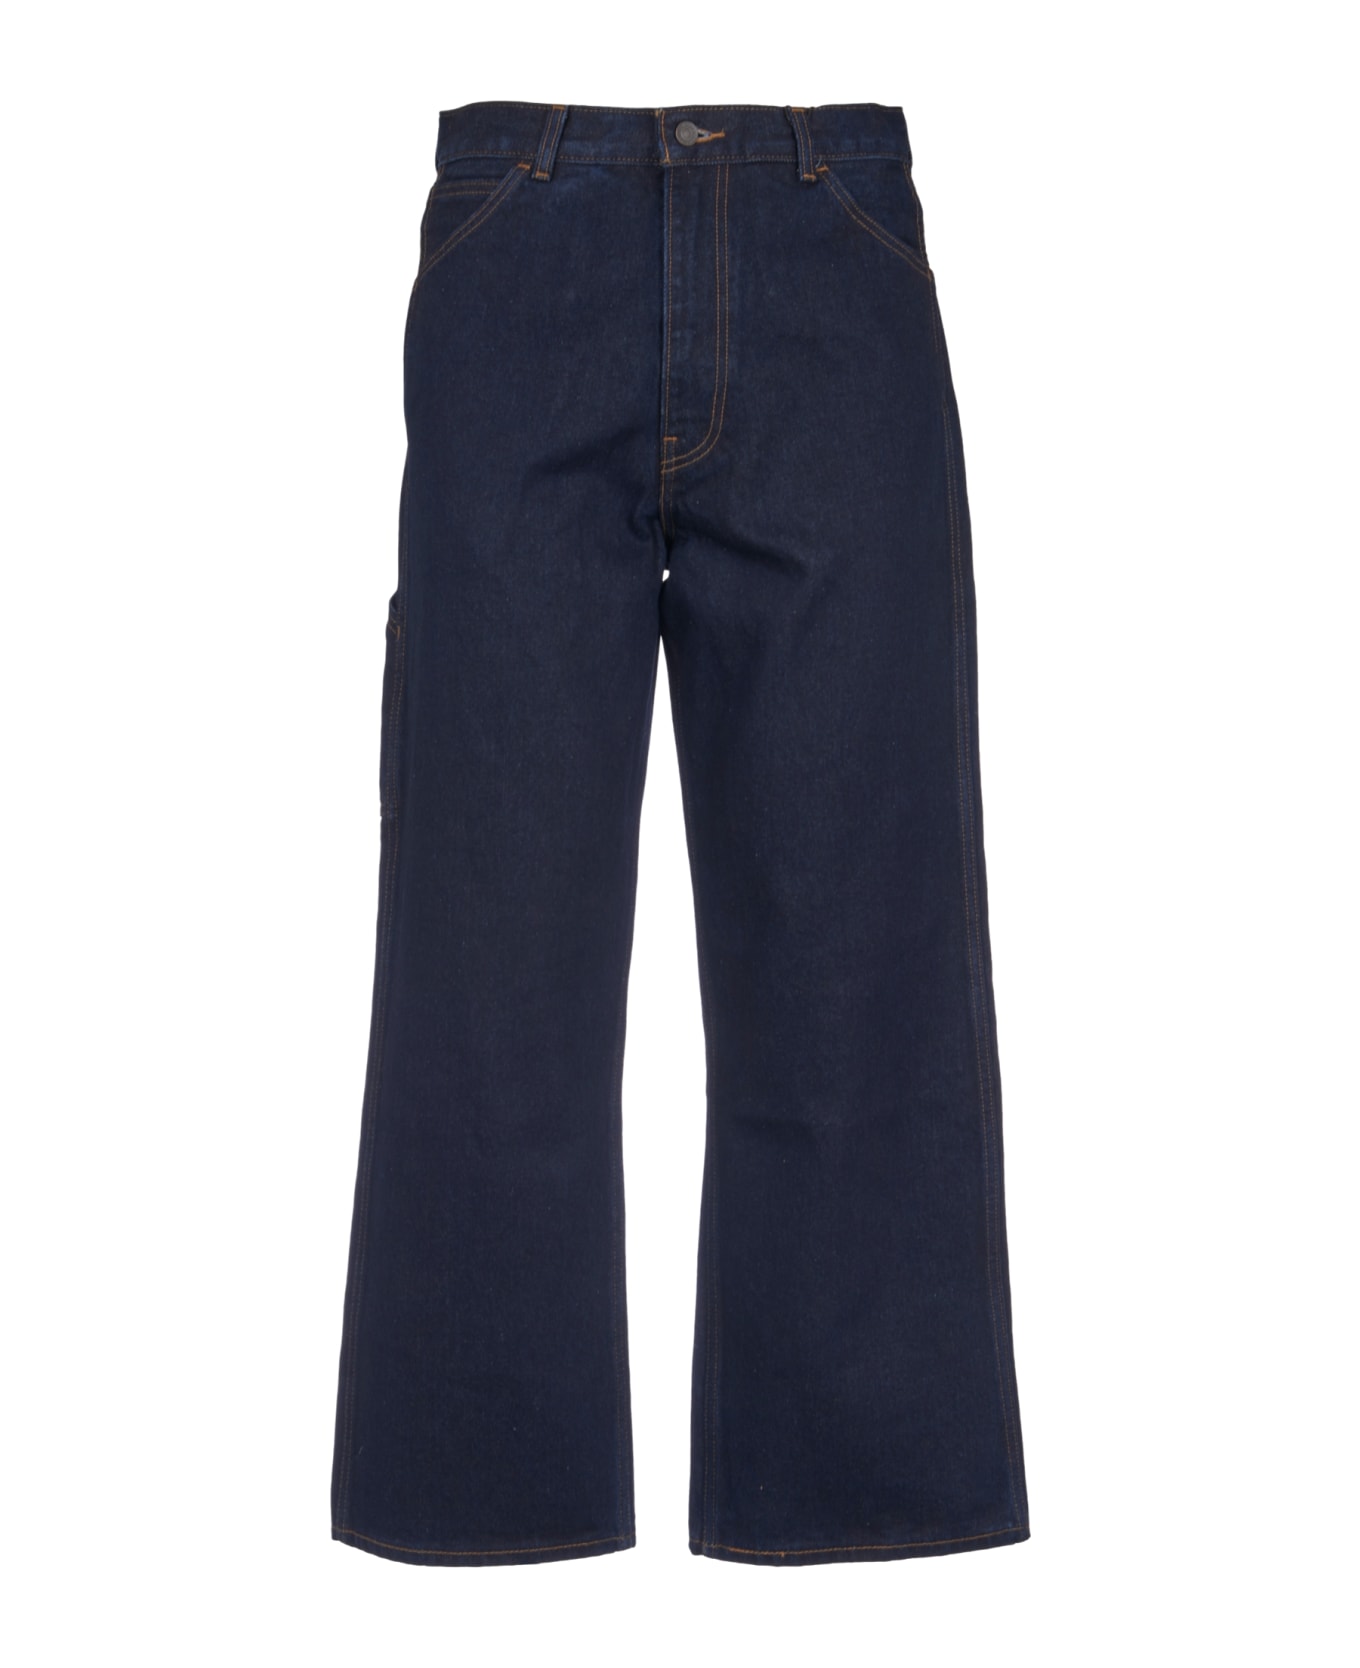 Levi's Buttoned Classic Jeans - Blue デニム